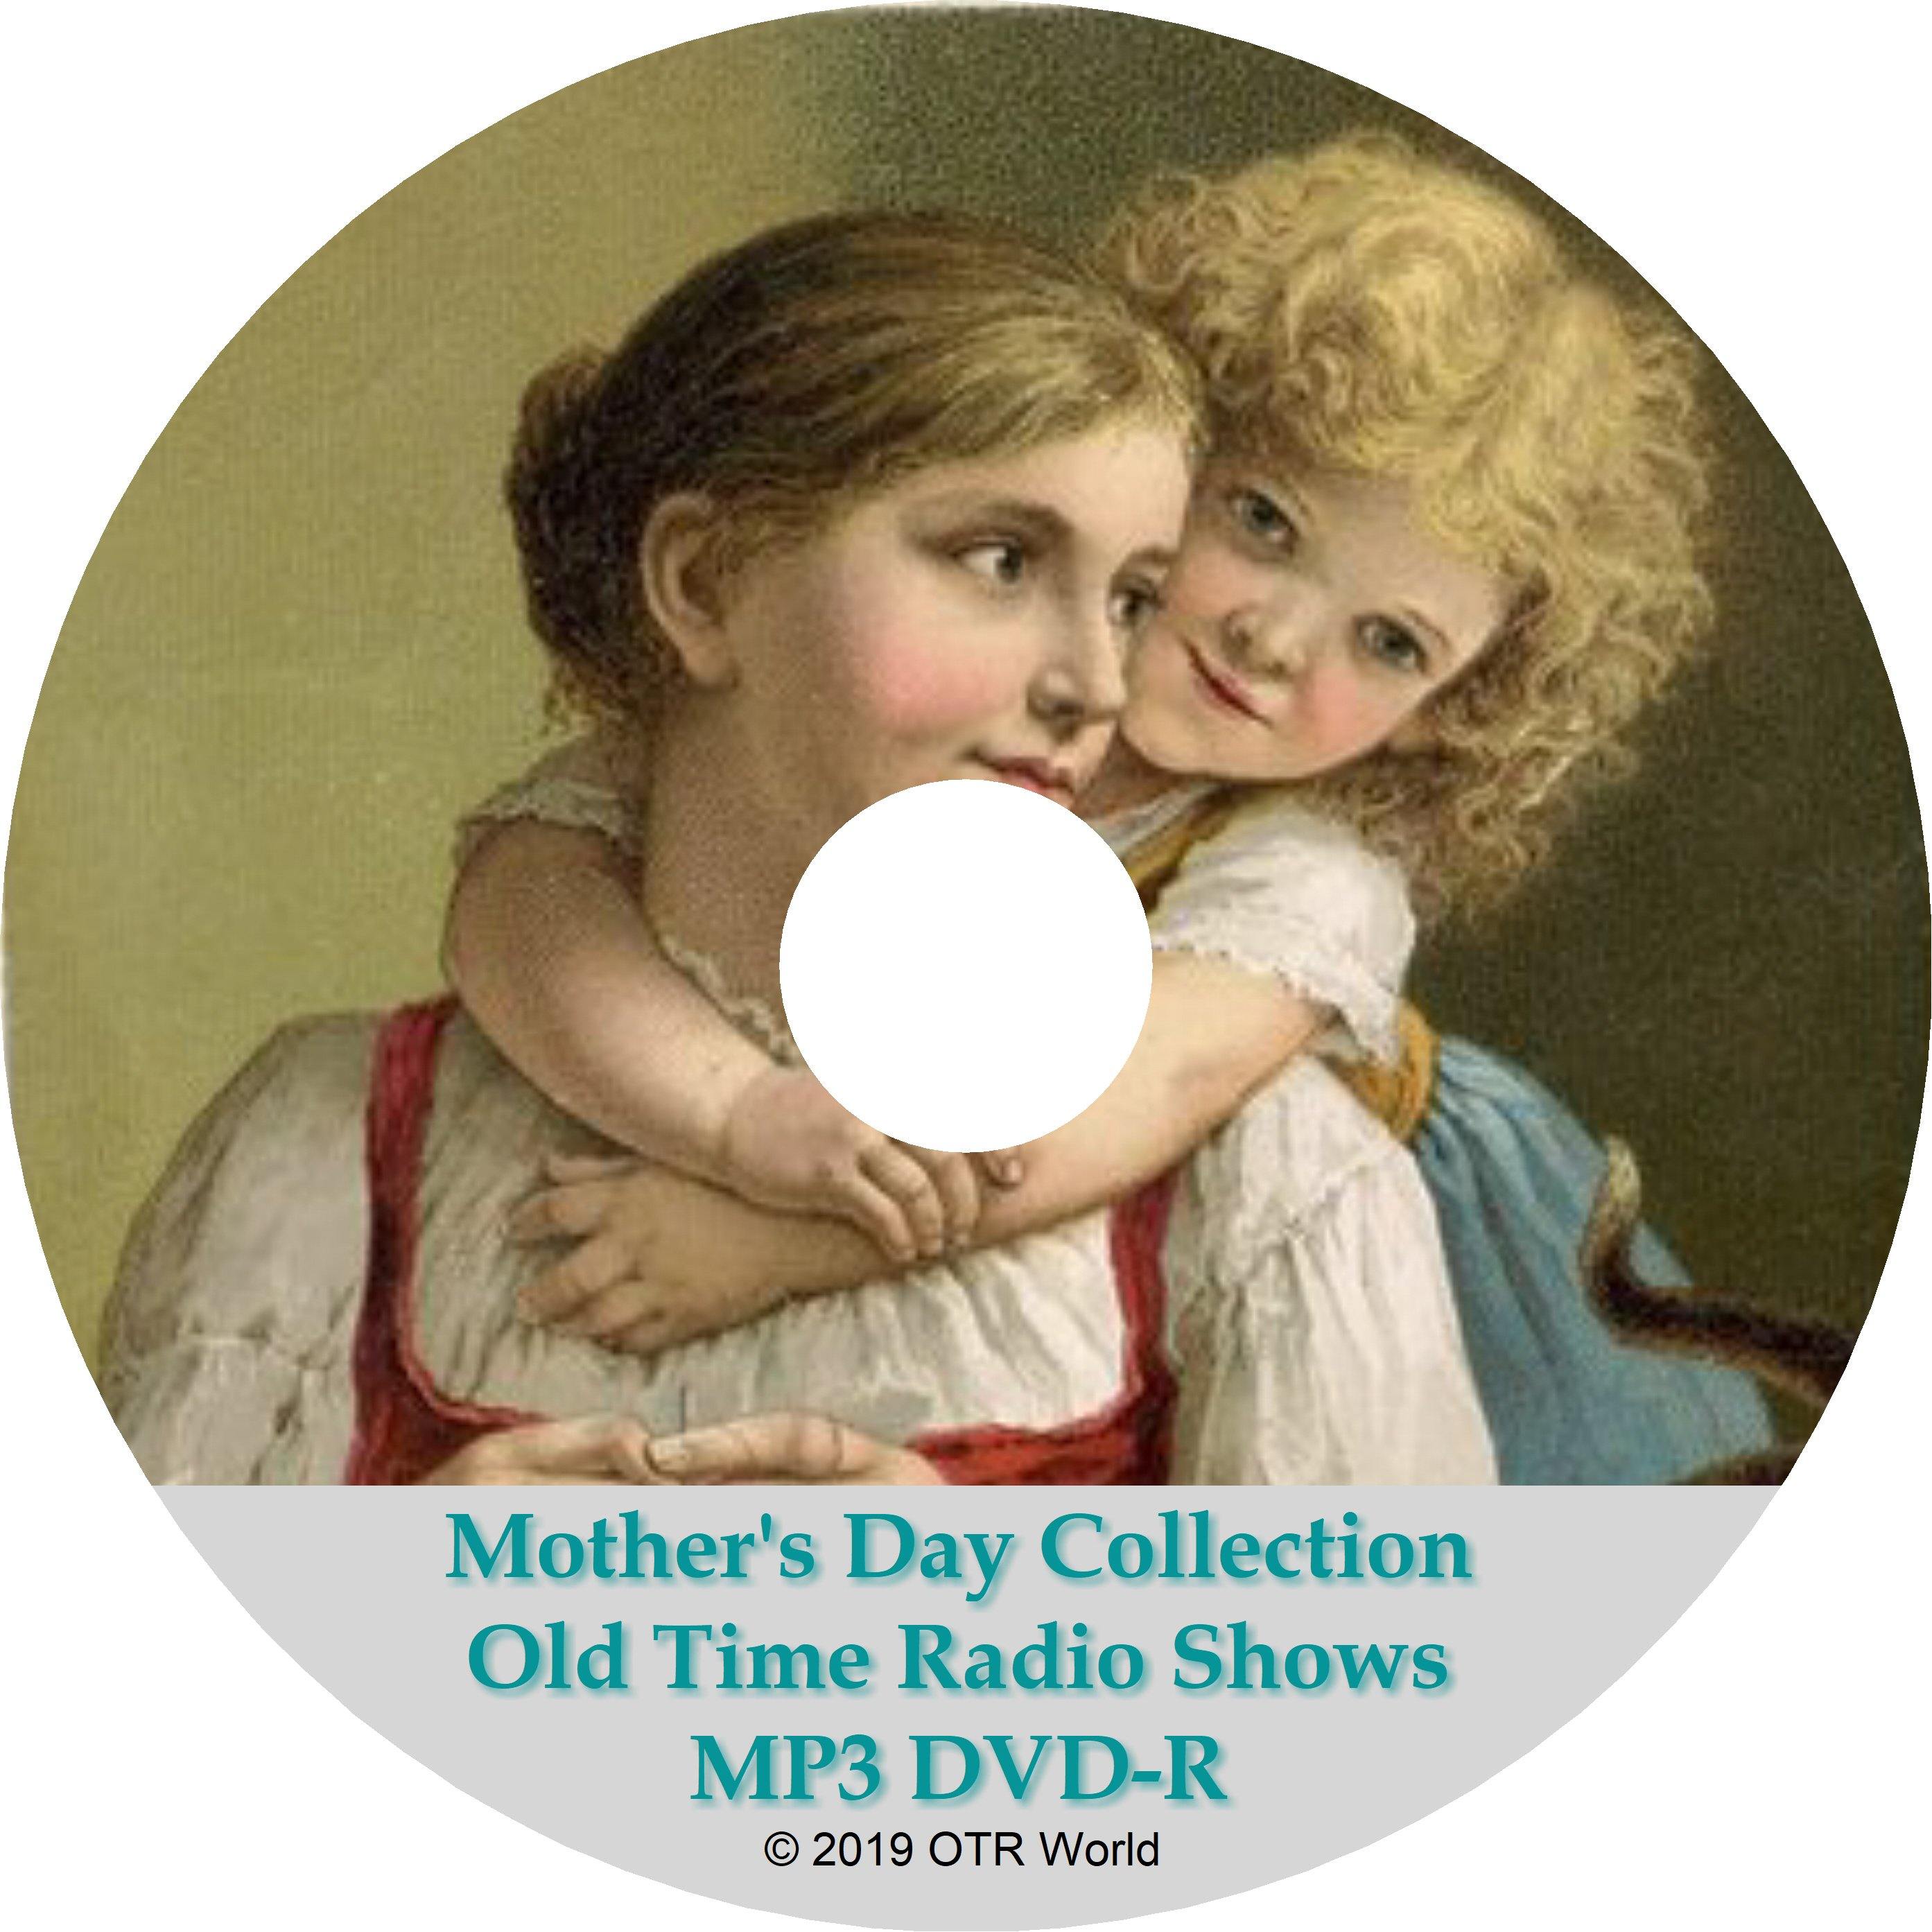 Mother's Day Collection Old Time Radio Shows OTRS MP3 DVD 182 Episodes - OTR World